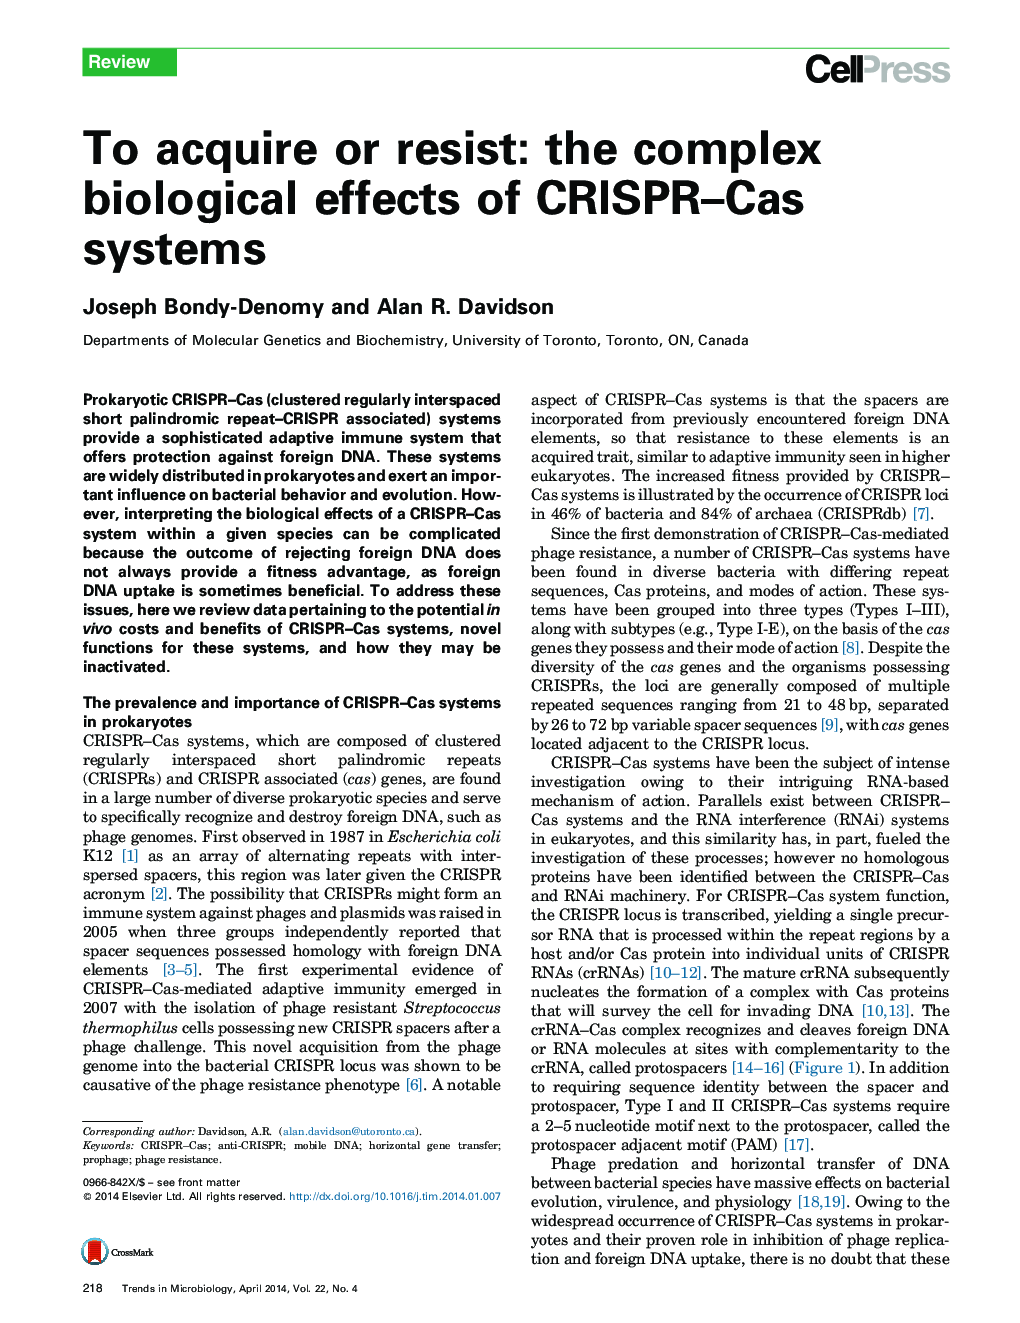 To acquire or resist: the complex biological effects of CRISPR–Cas systems